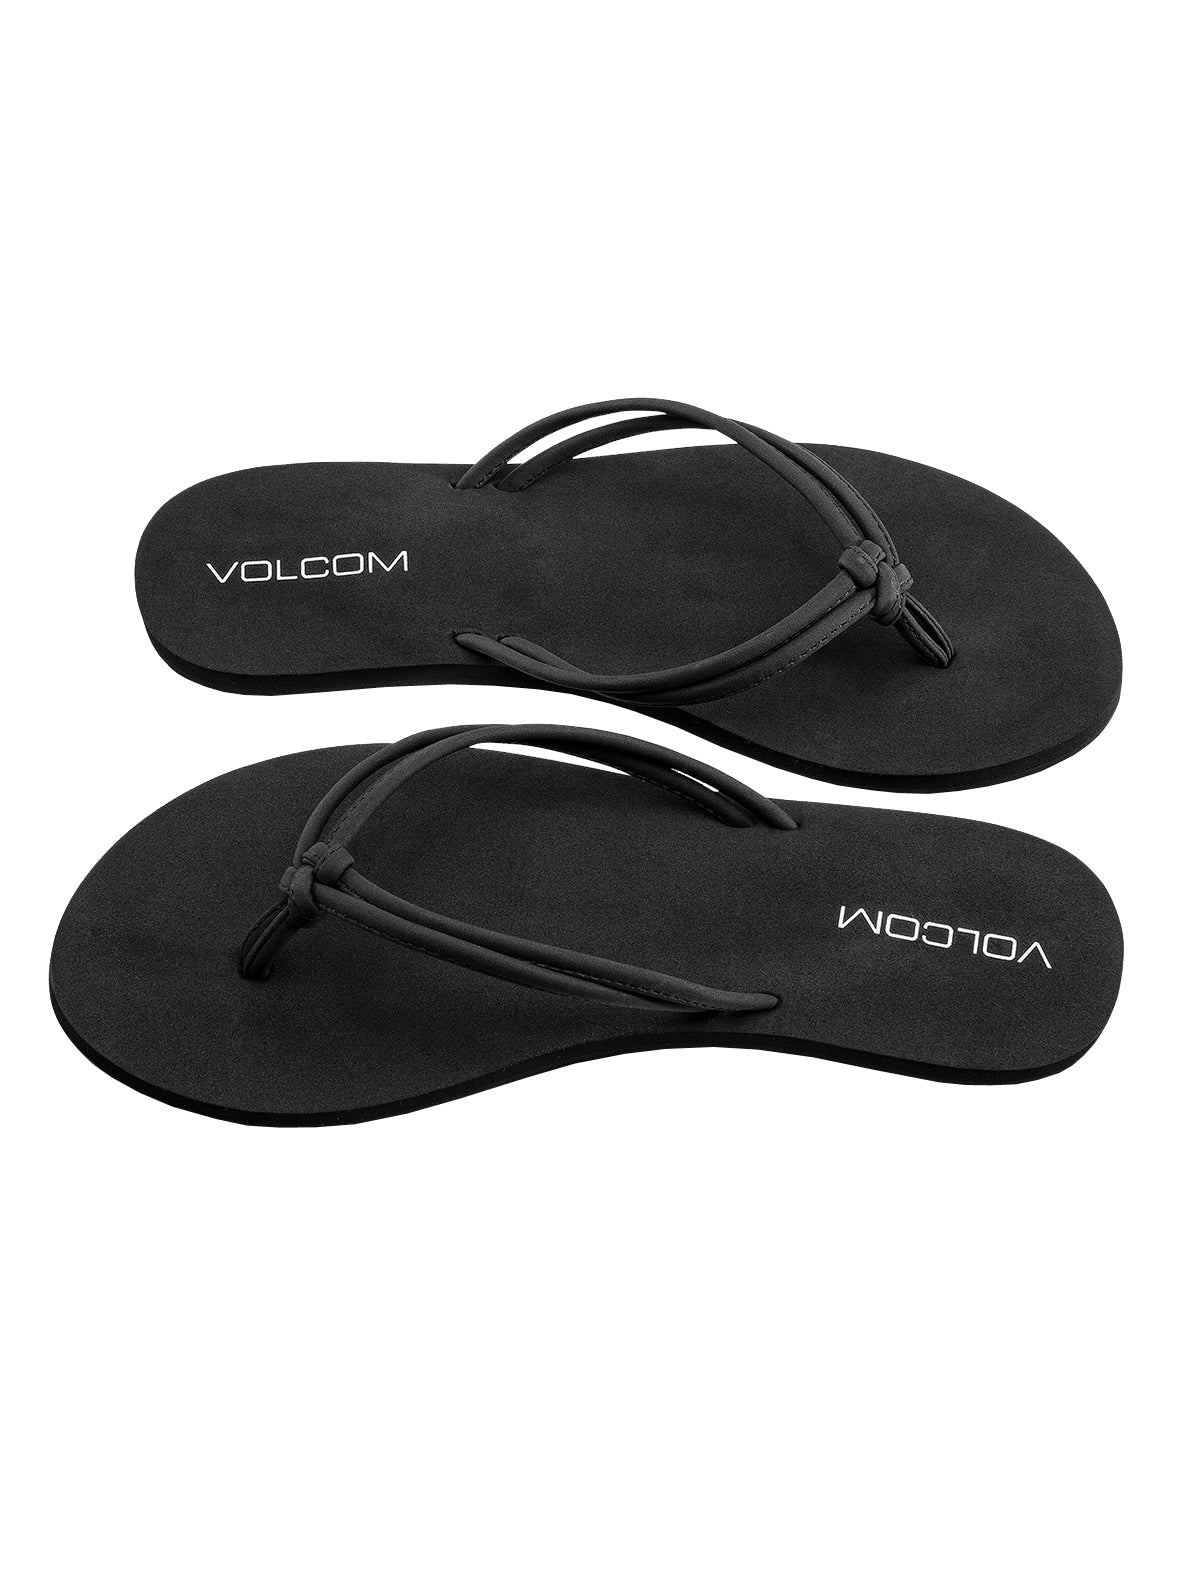 Volcom Forever and Ever 2 Womens Sandal BKO23-Black Out 5